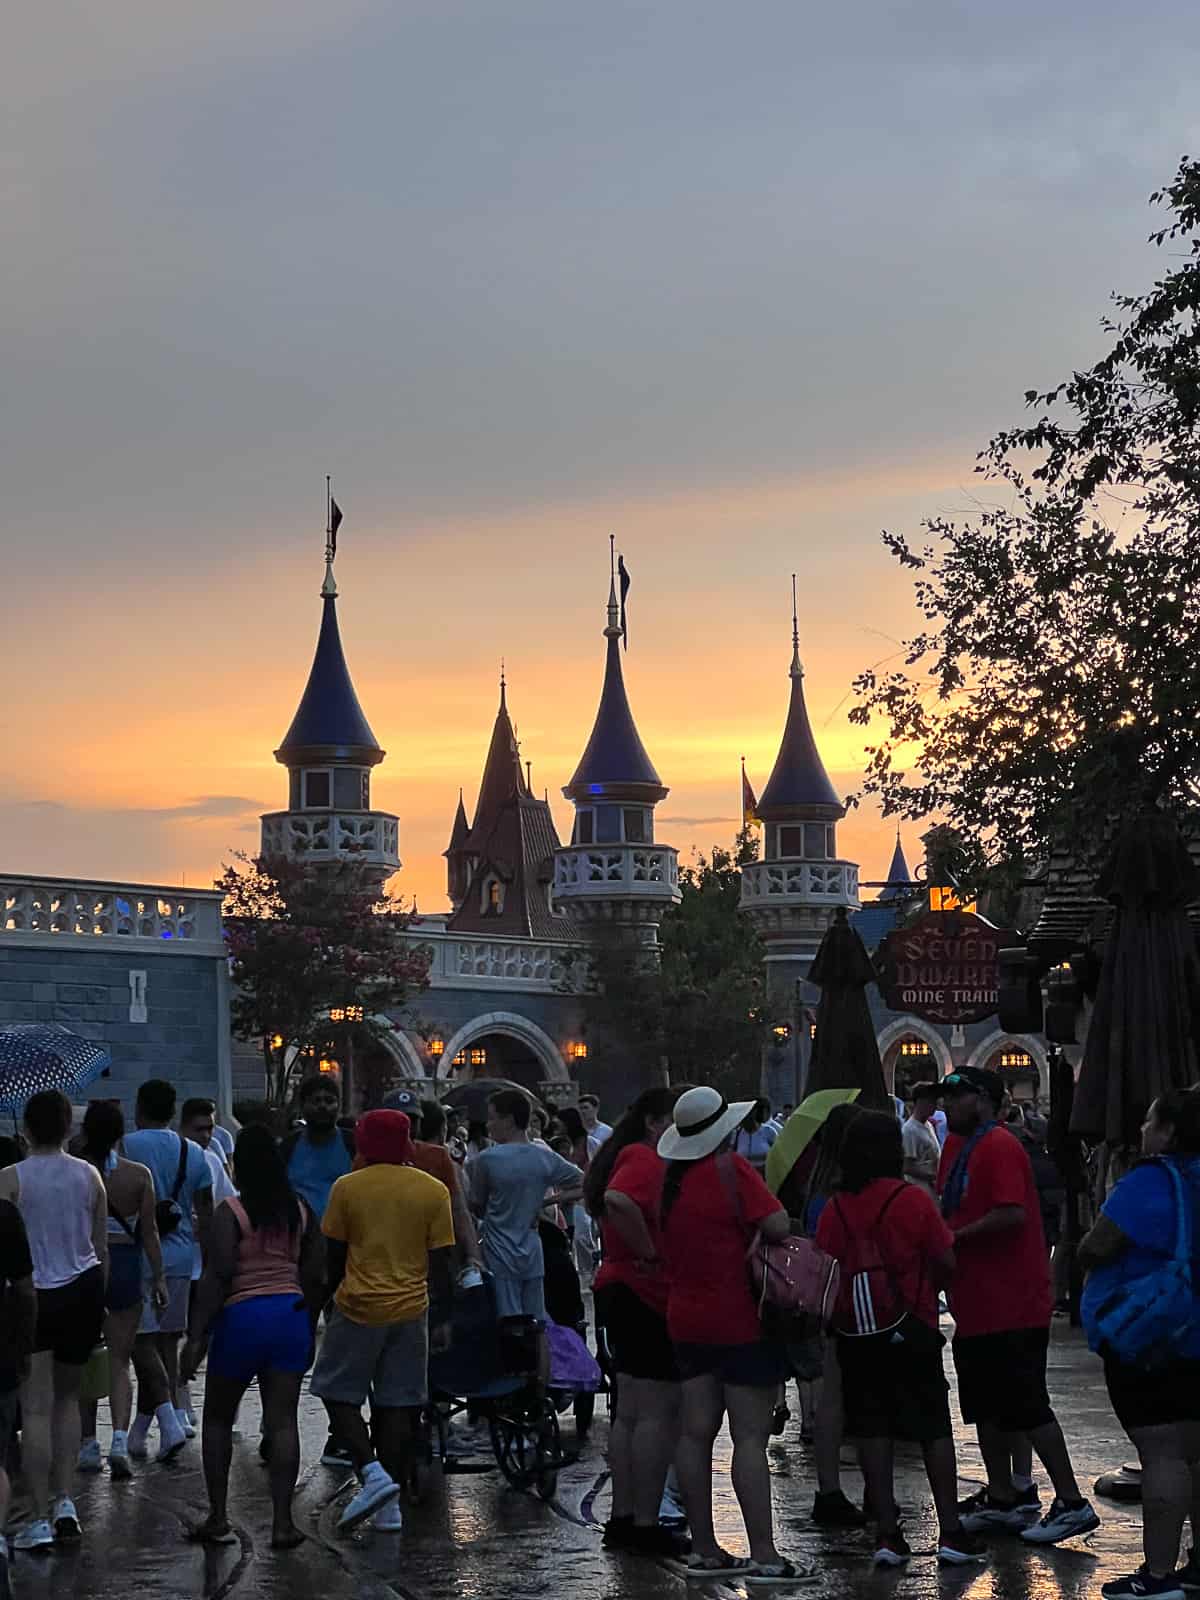 Walt Disney World Package example of crowds at Magic Kingdom Park in July